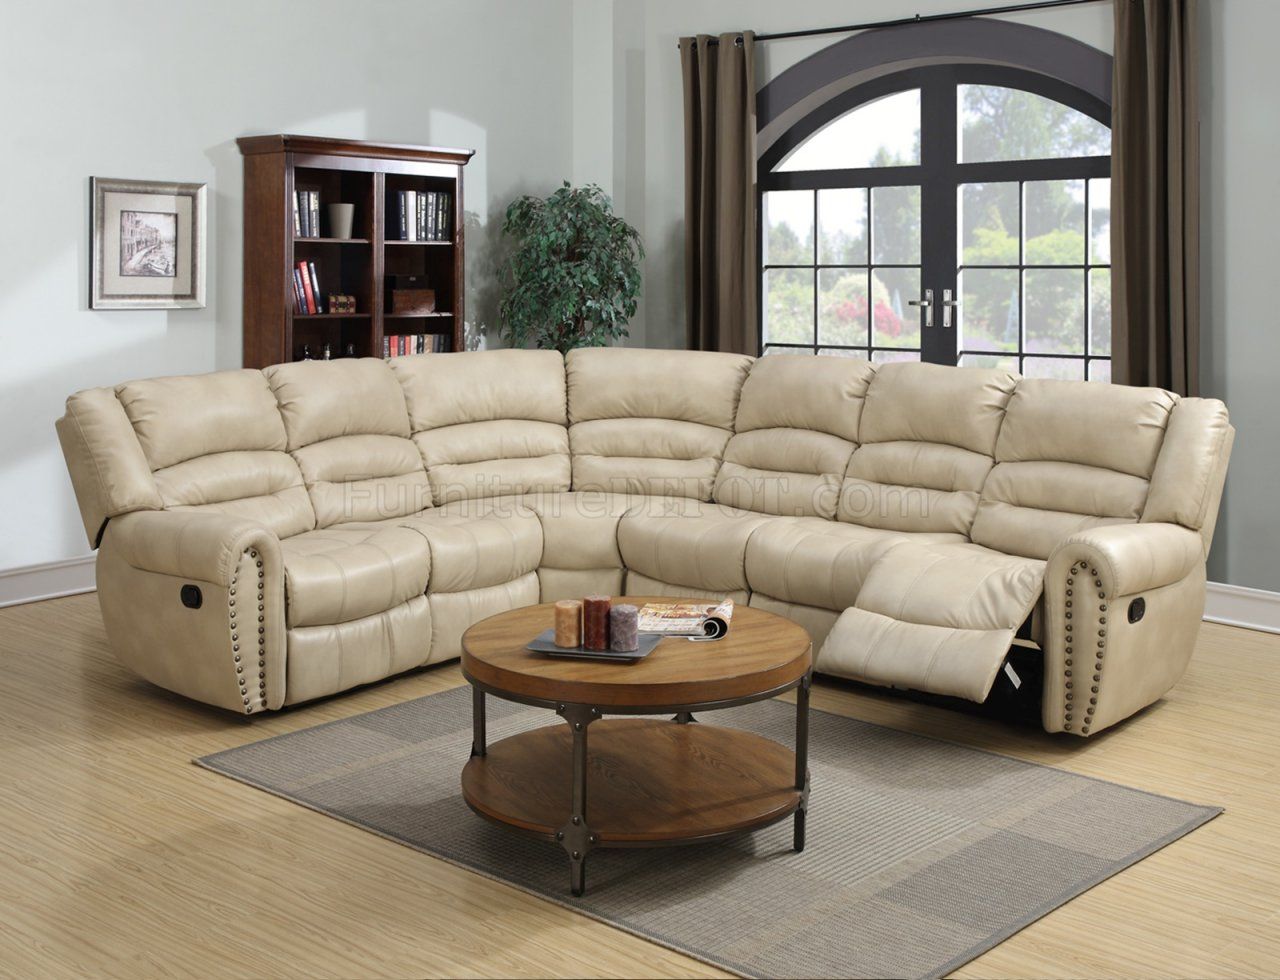 G687 Motion Sectional Sofa In Beige Bonded Leatherglory With Small L Shaped Sectional Sofas In Beige (View 7 of 21)